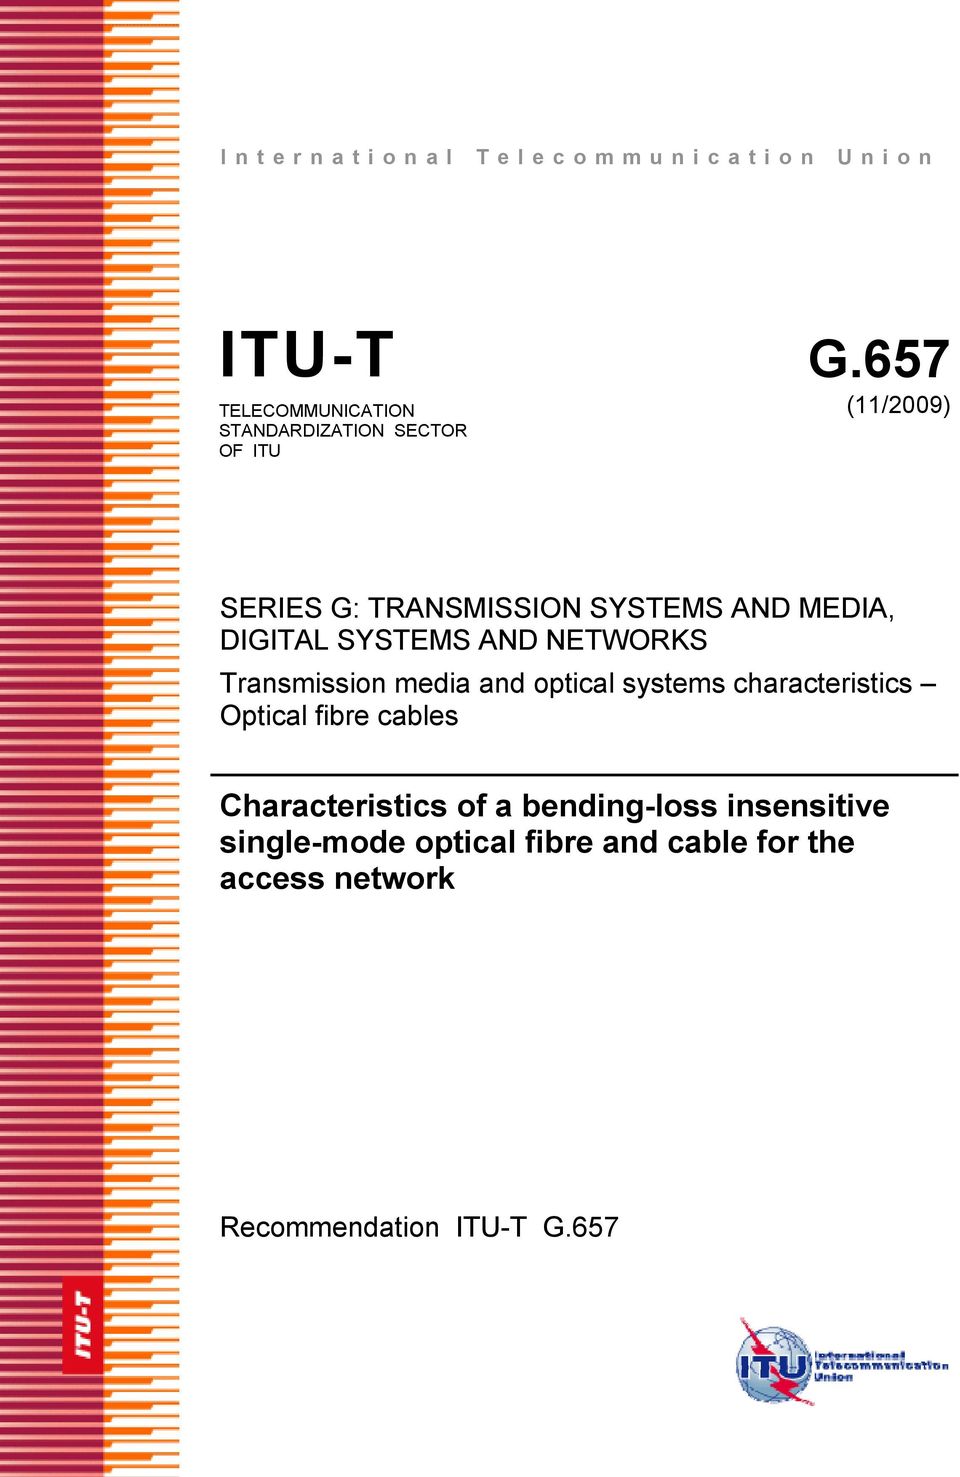 MEDIA, DIGITAL SYSTEMS AND NETWORKS Transmission media and optical systems characteristics